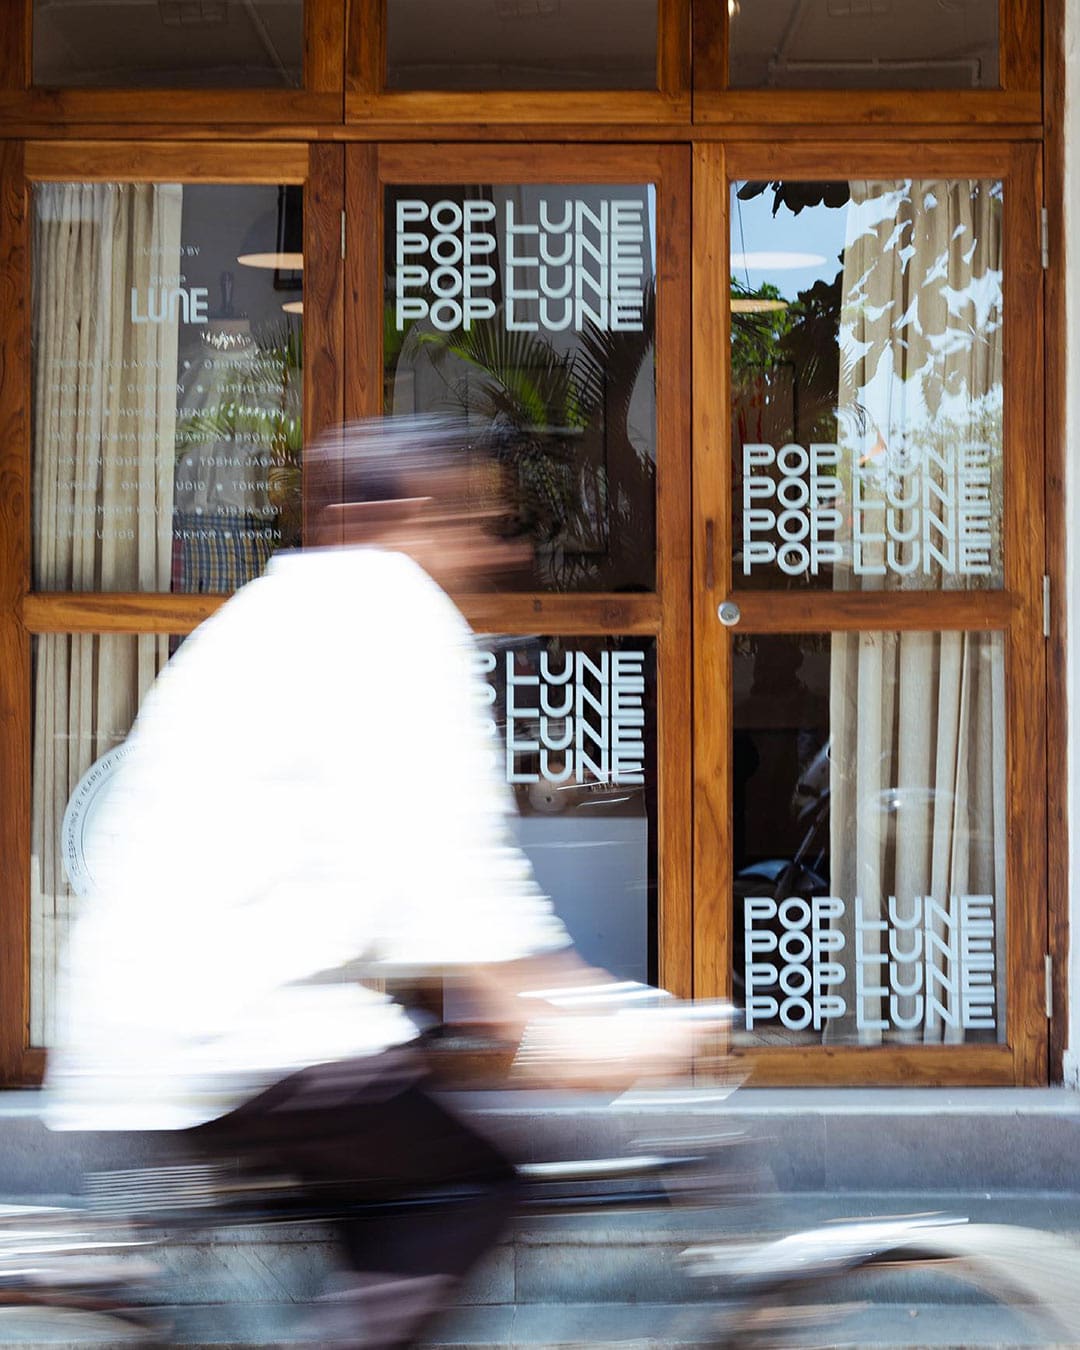 A person wearing a white shirt on a bicycle blurs past a window in a wooden frame with the words POP LUNE written in white on the glass.